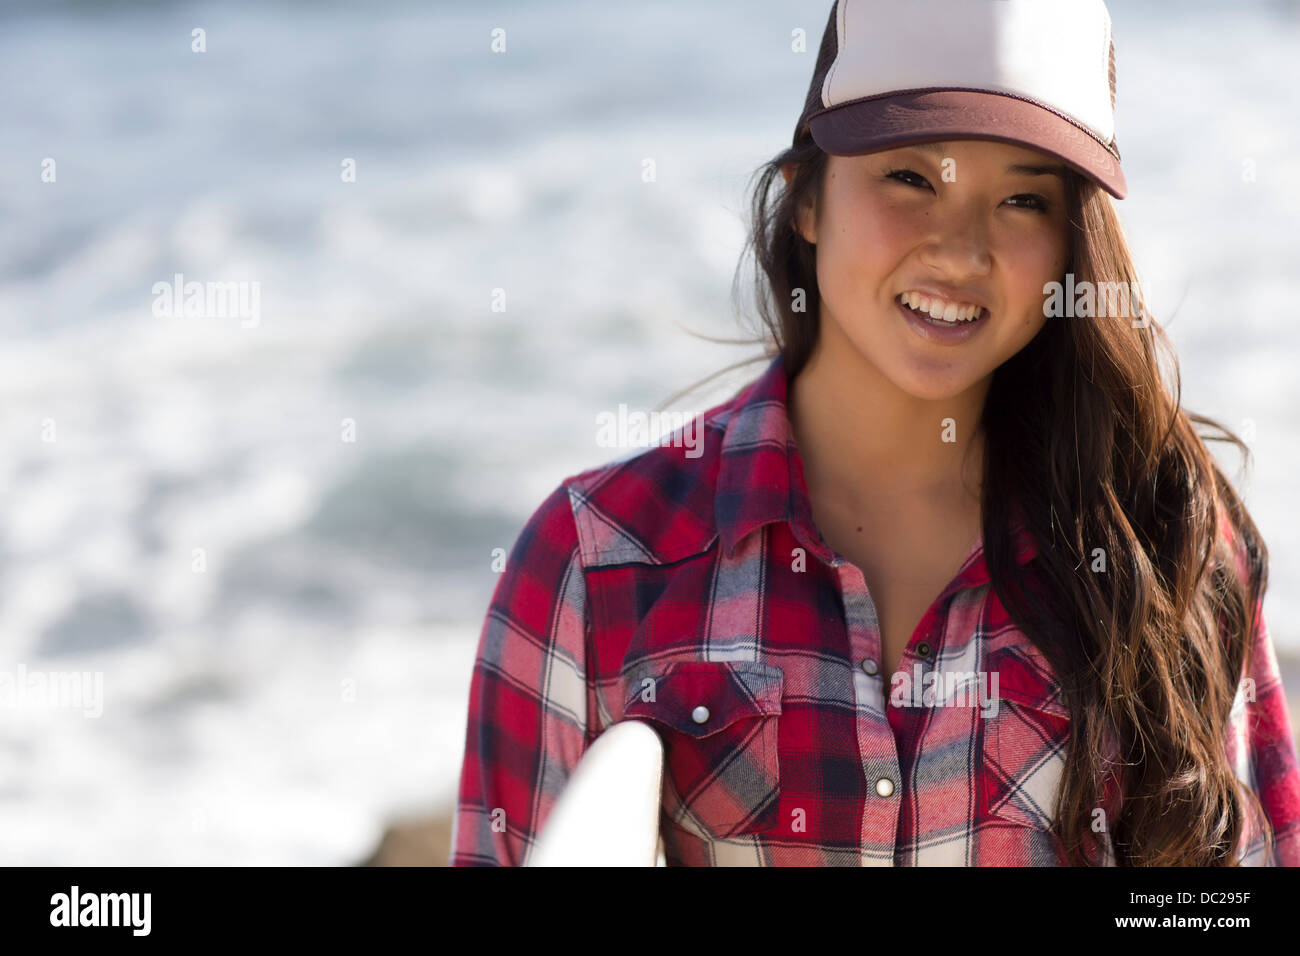 Young woman wearing baseball cap with surfboard Stock Photo - Alamy